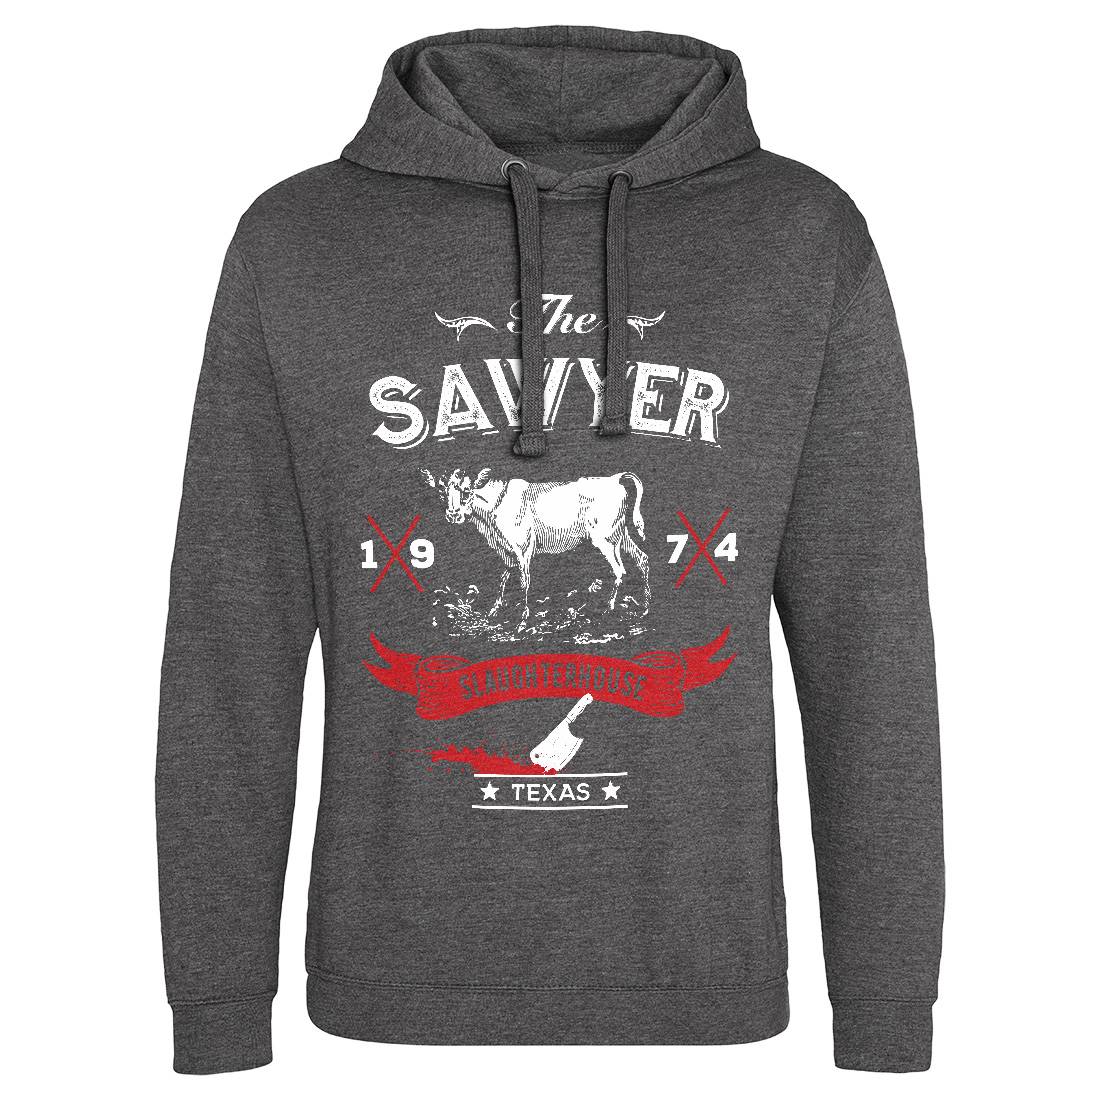 Sawyer Slaughterhouse Mens Hoodie Without Pocket Horror D208